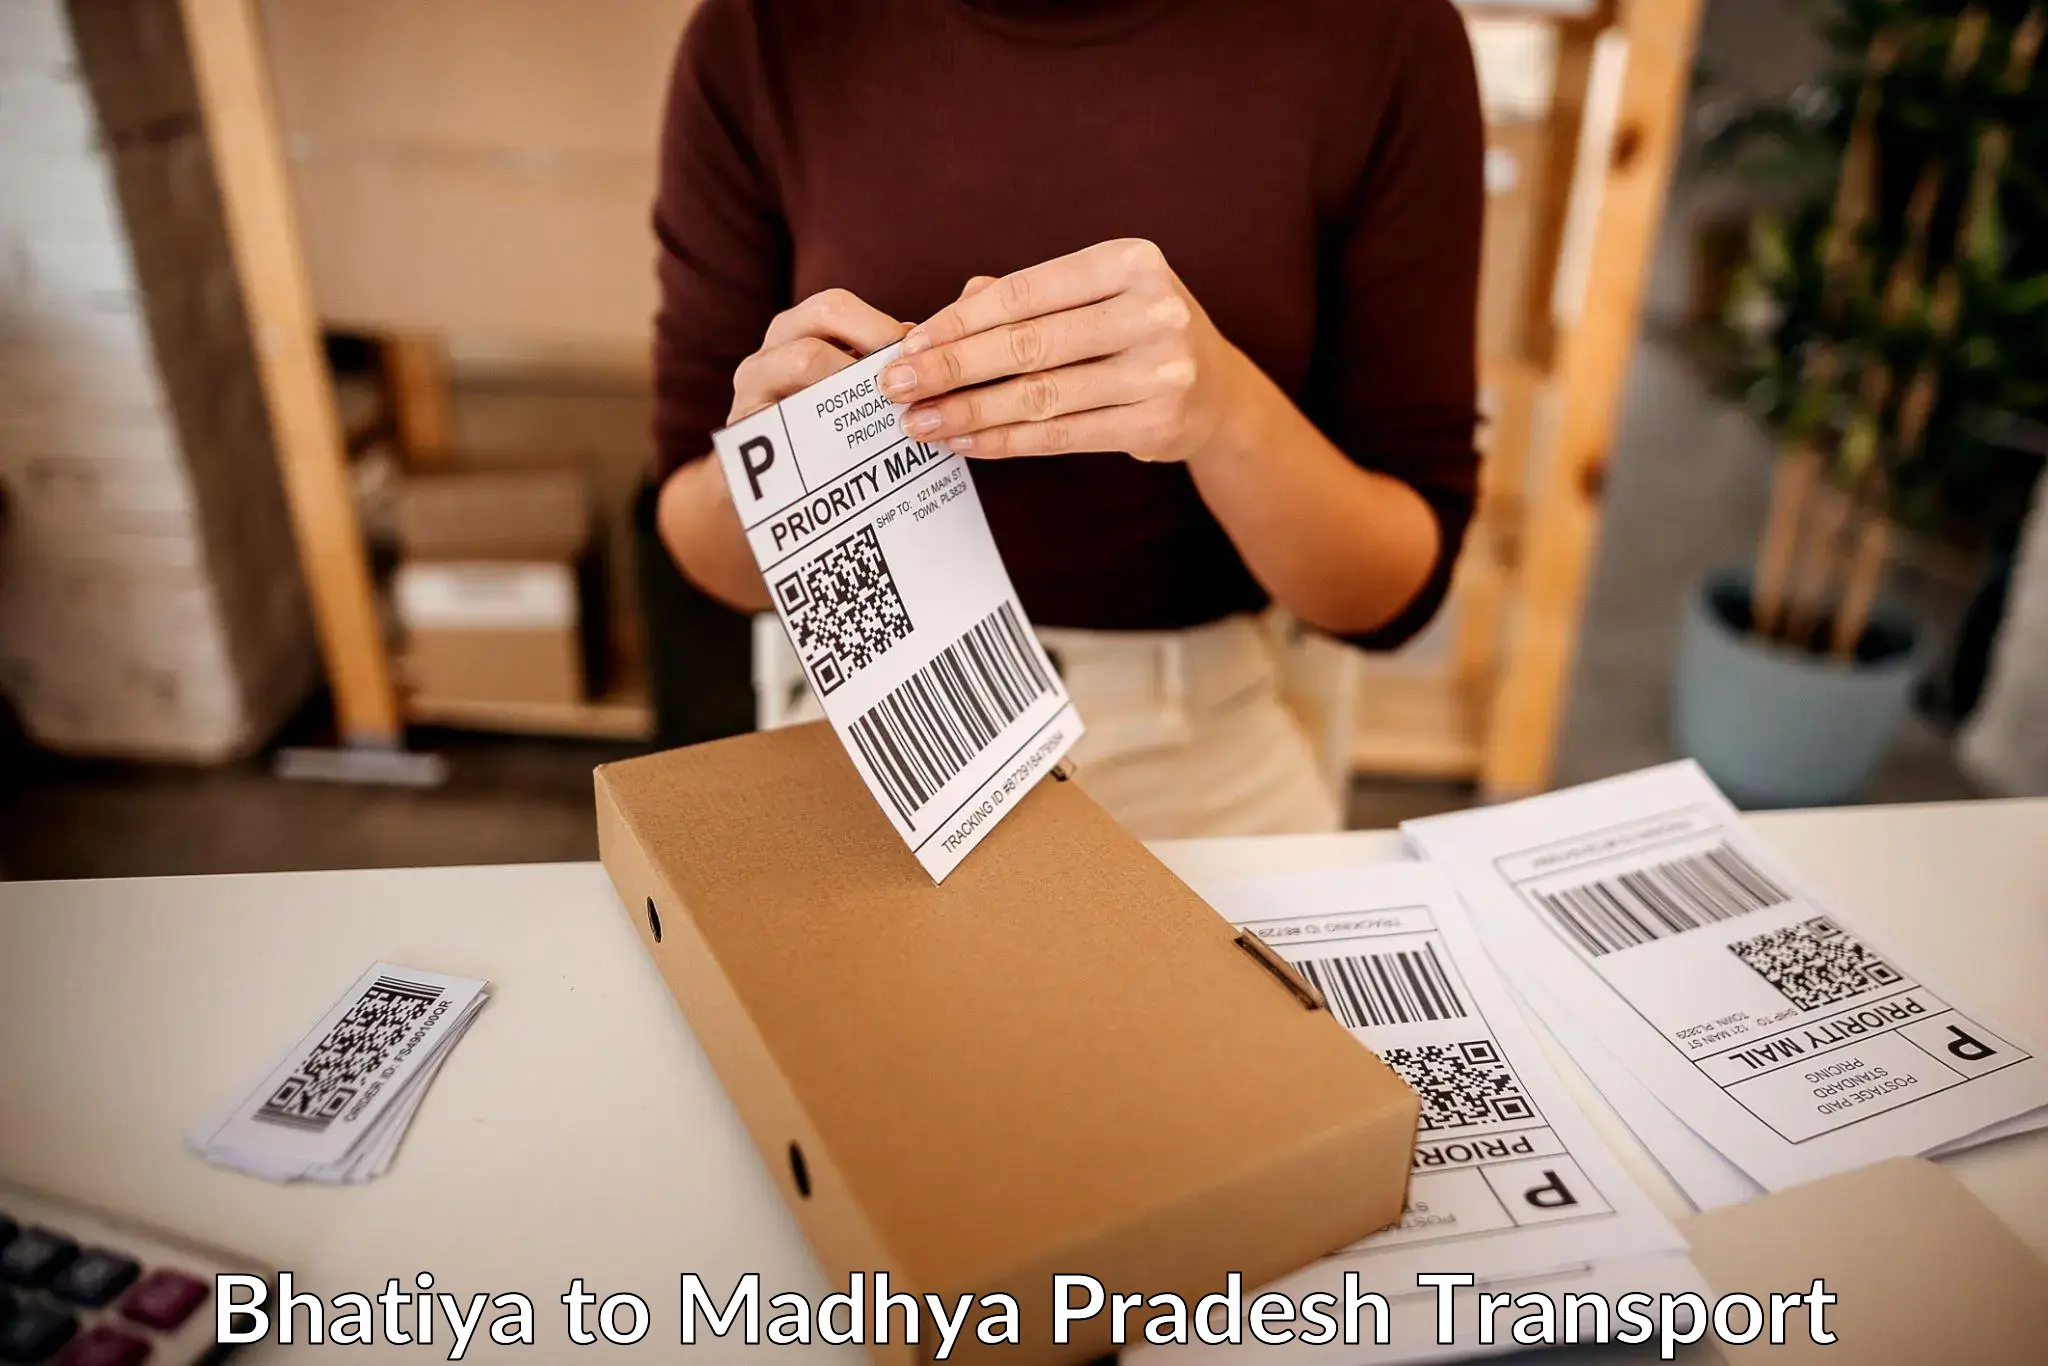 Goods delivery service Bhatiya to Gotegaon